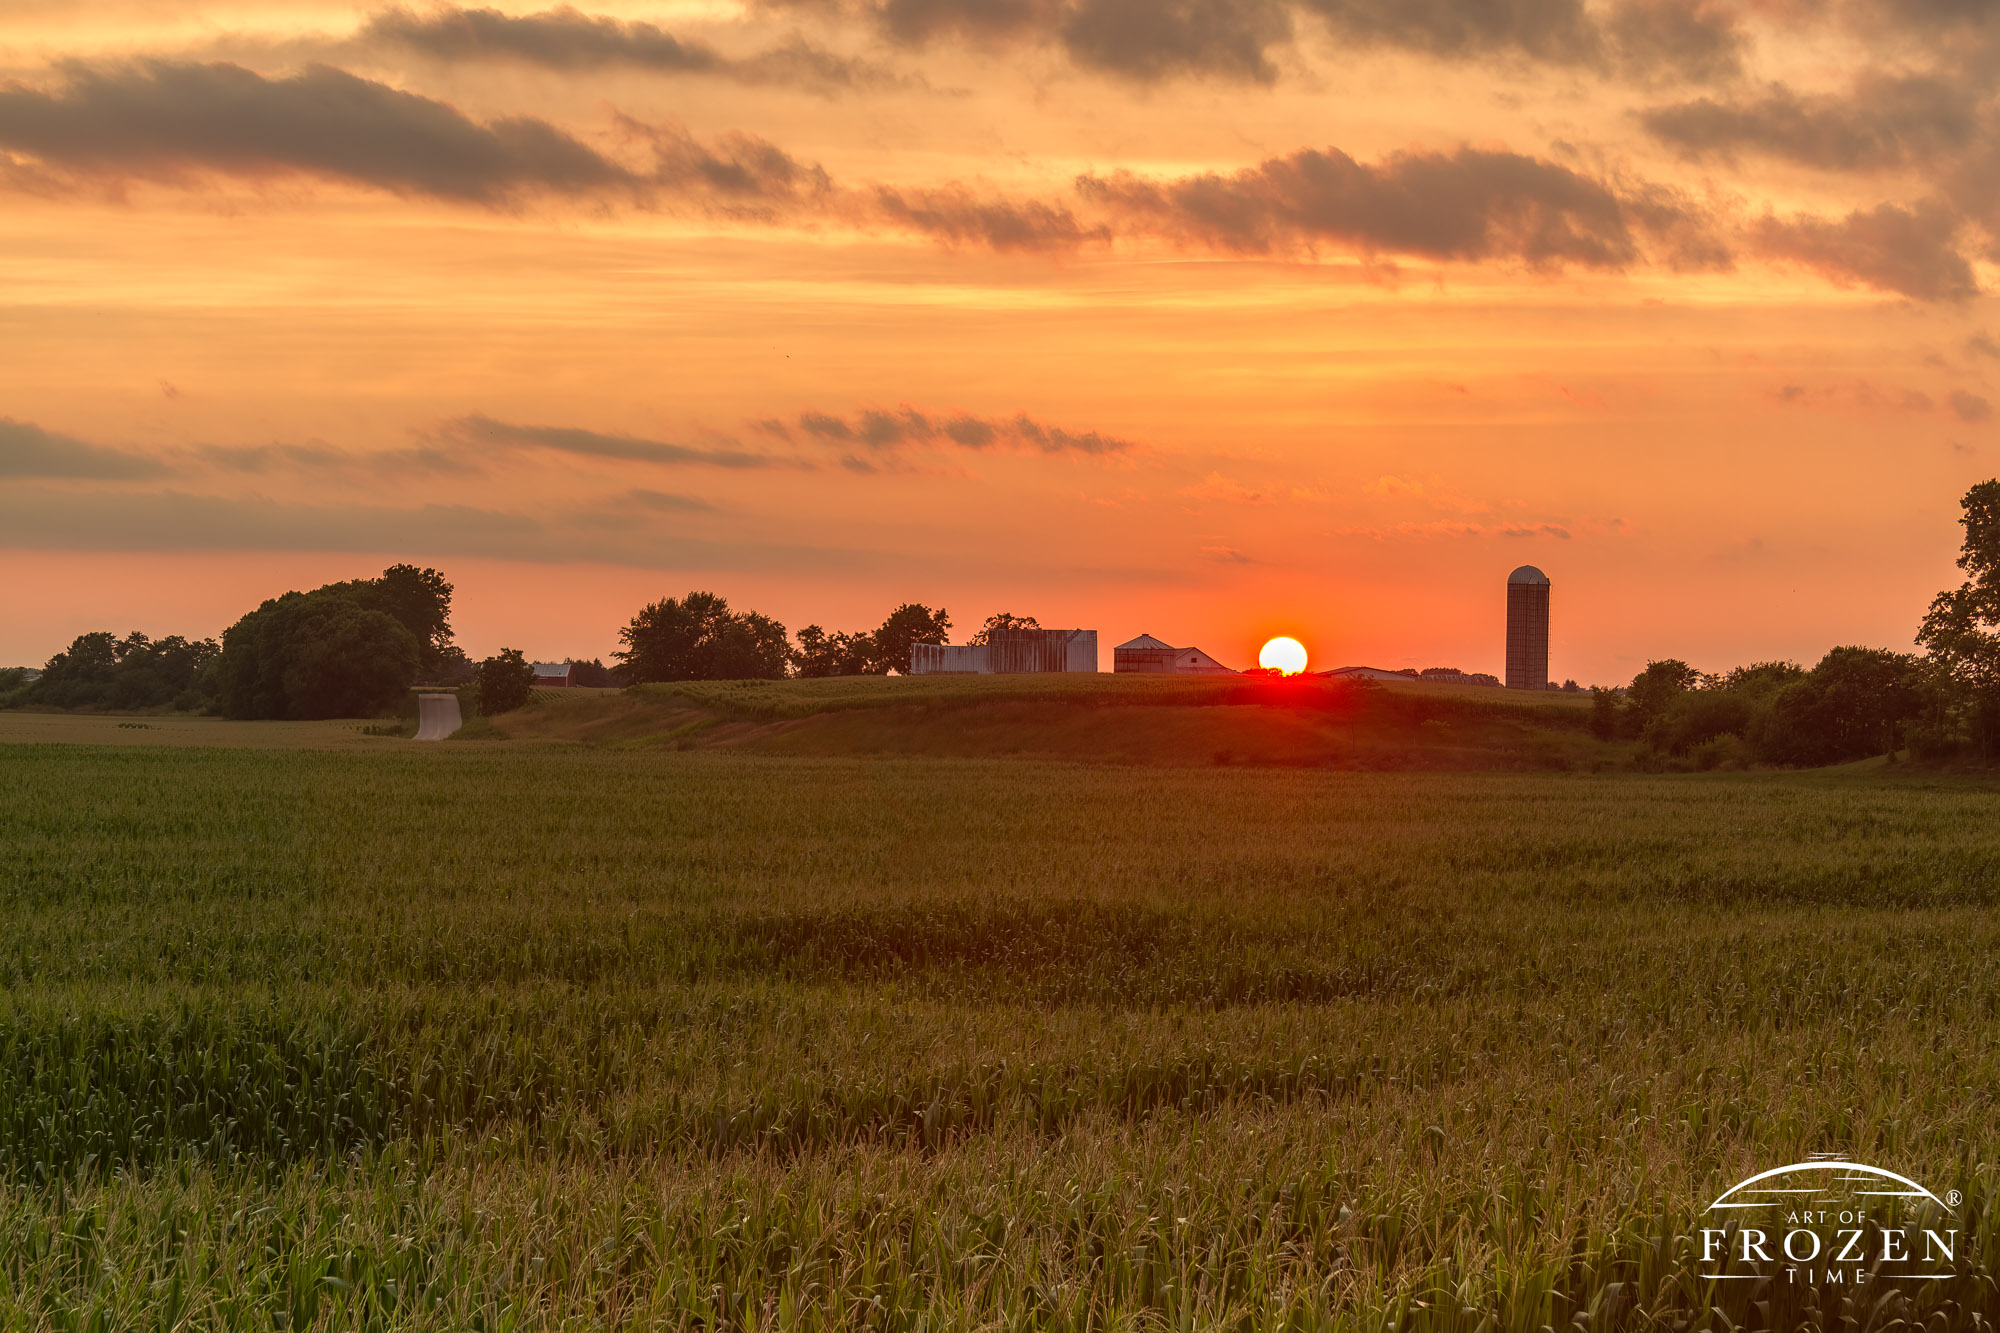 A sunset over a Scioto Valley farm where the sun is a bright orange ball before it sinks below the horizon whose bright light created a silhouette of the Ohio farmstead